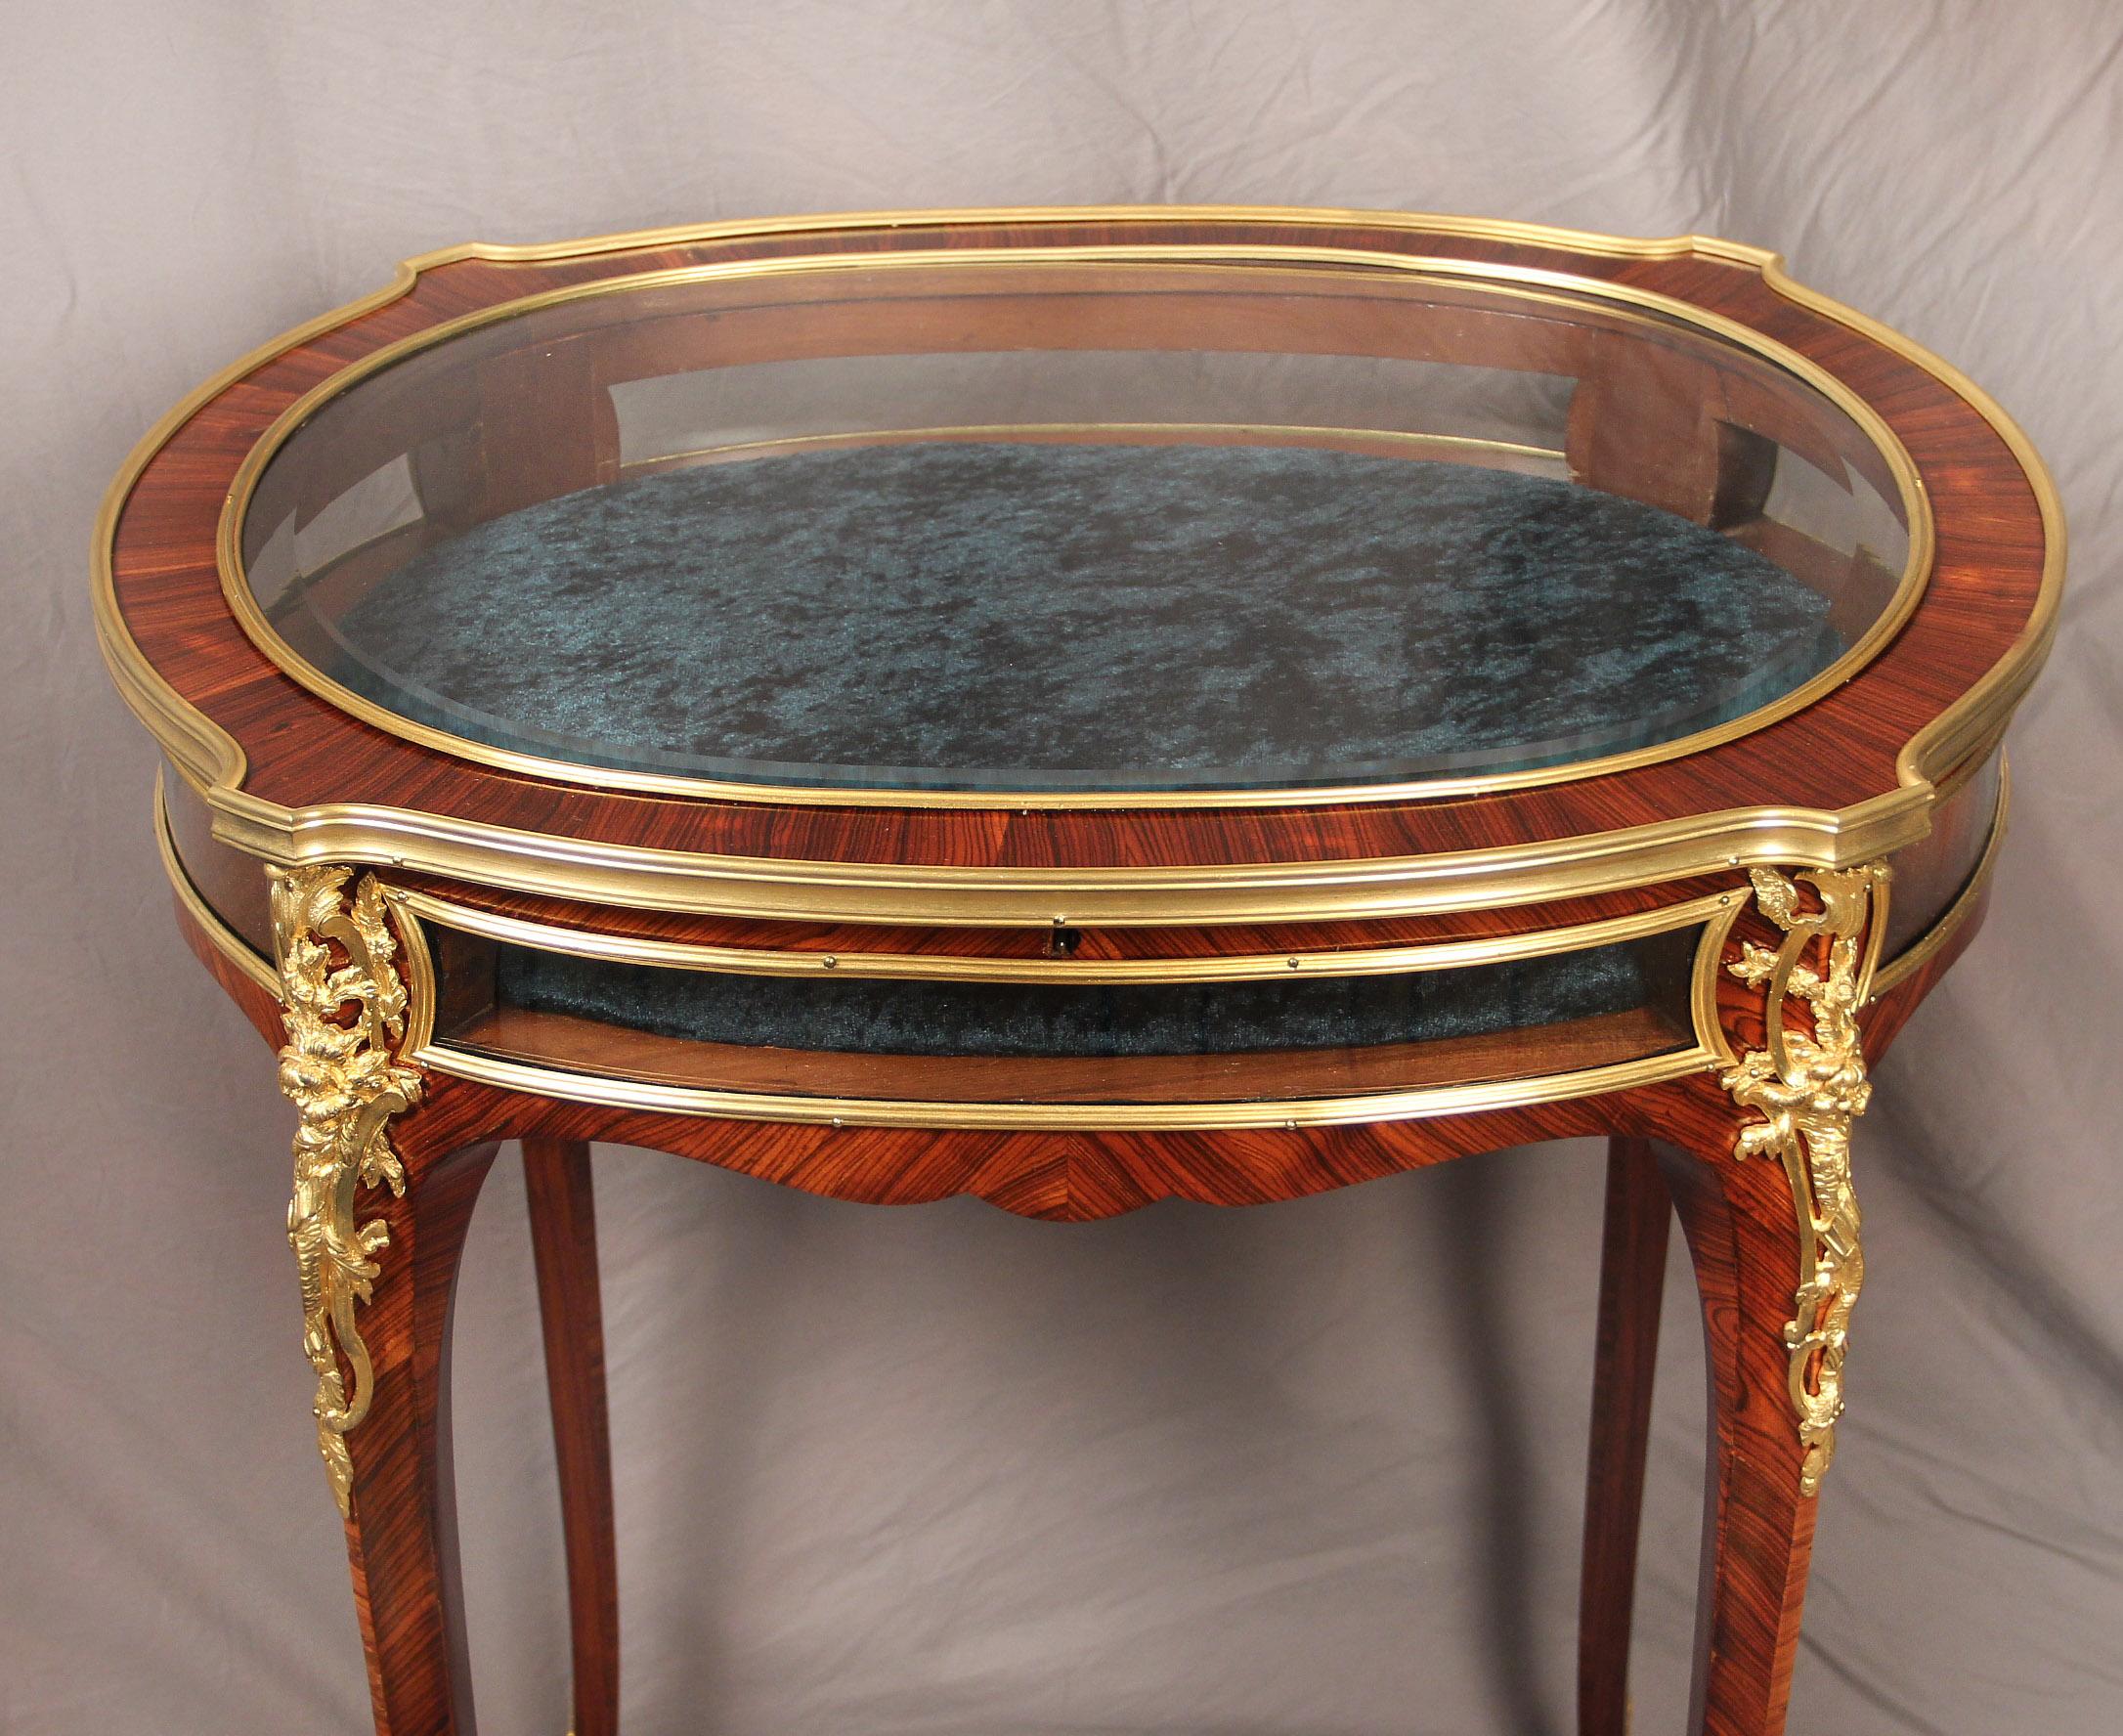 French Wonderful 19th Century Gilt Bronze Mounted Vitrine Table by Joseph Zwiener For Sale